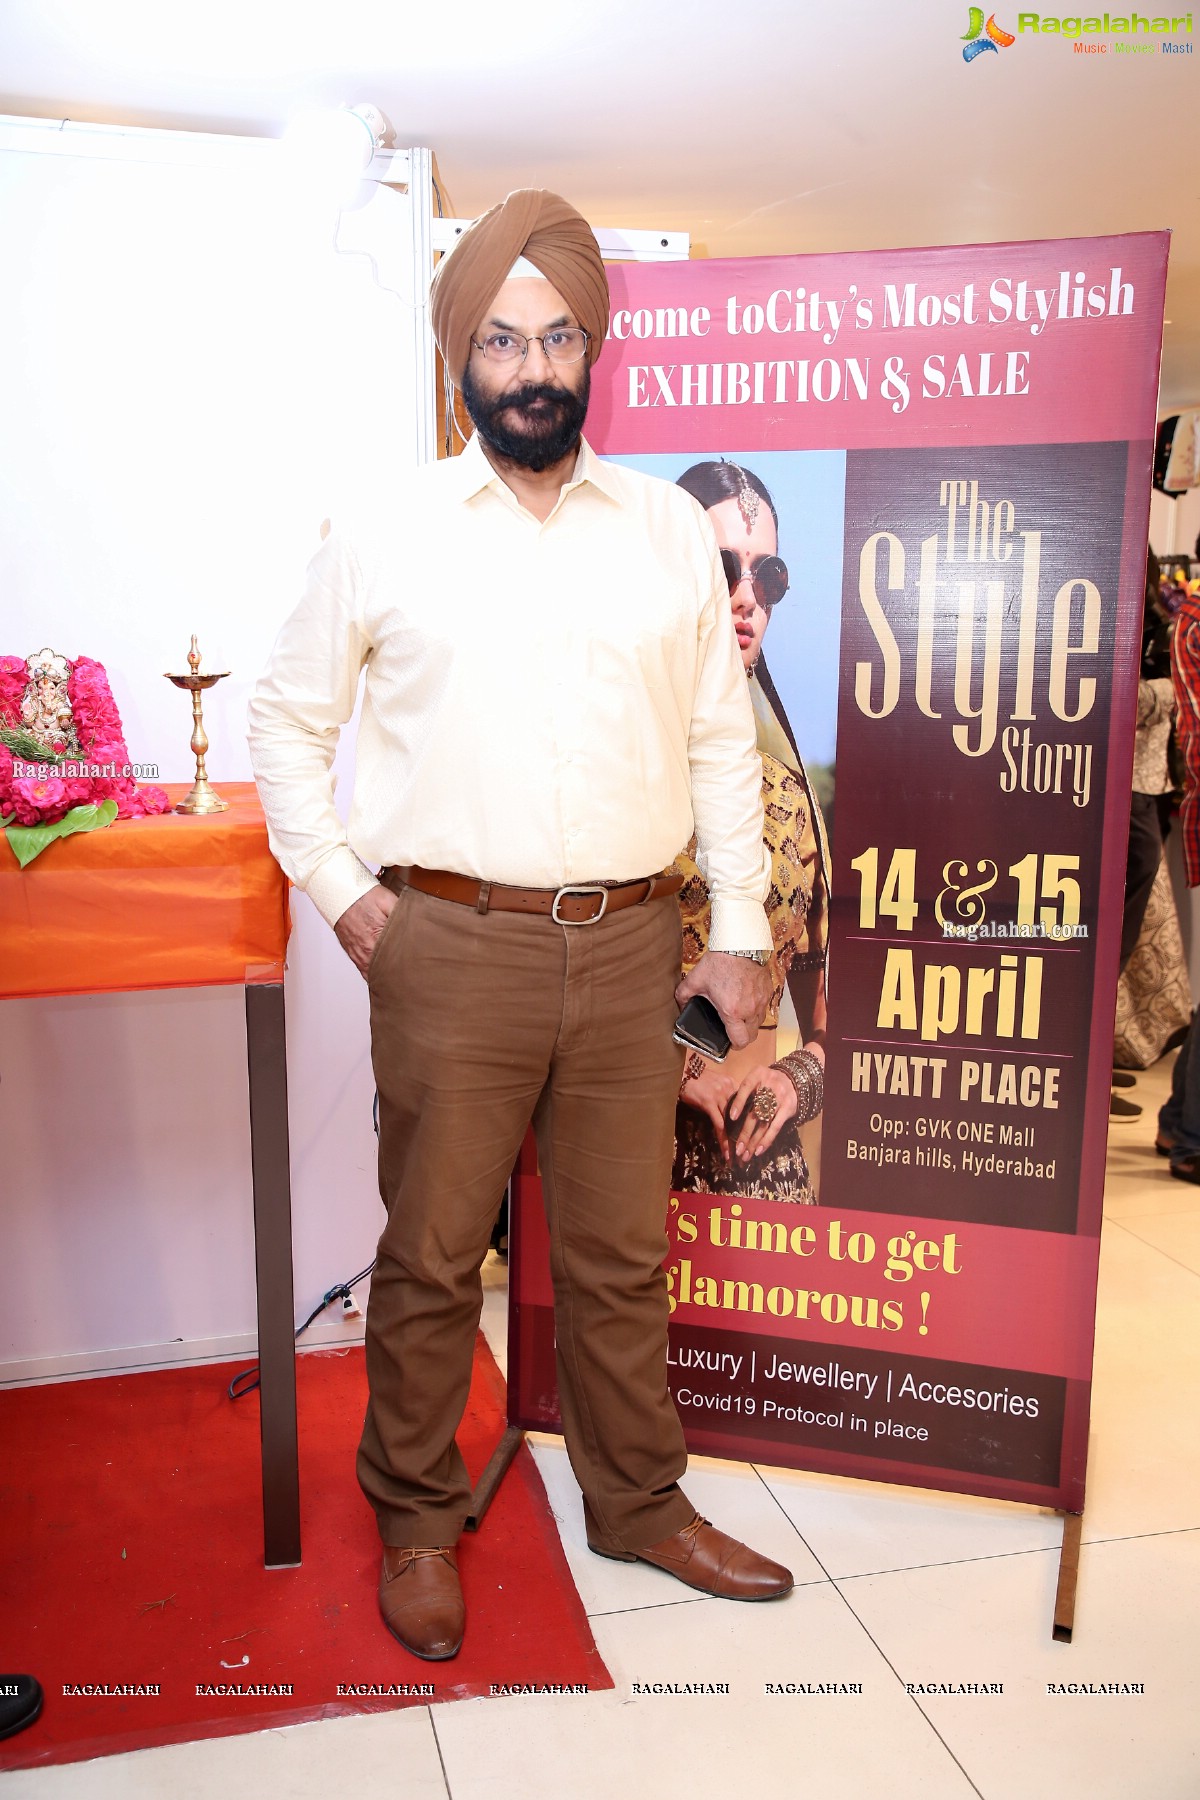 The Style Story Stylish Exhibition and Sale Kicks Off at Hyatt Place 